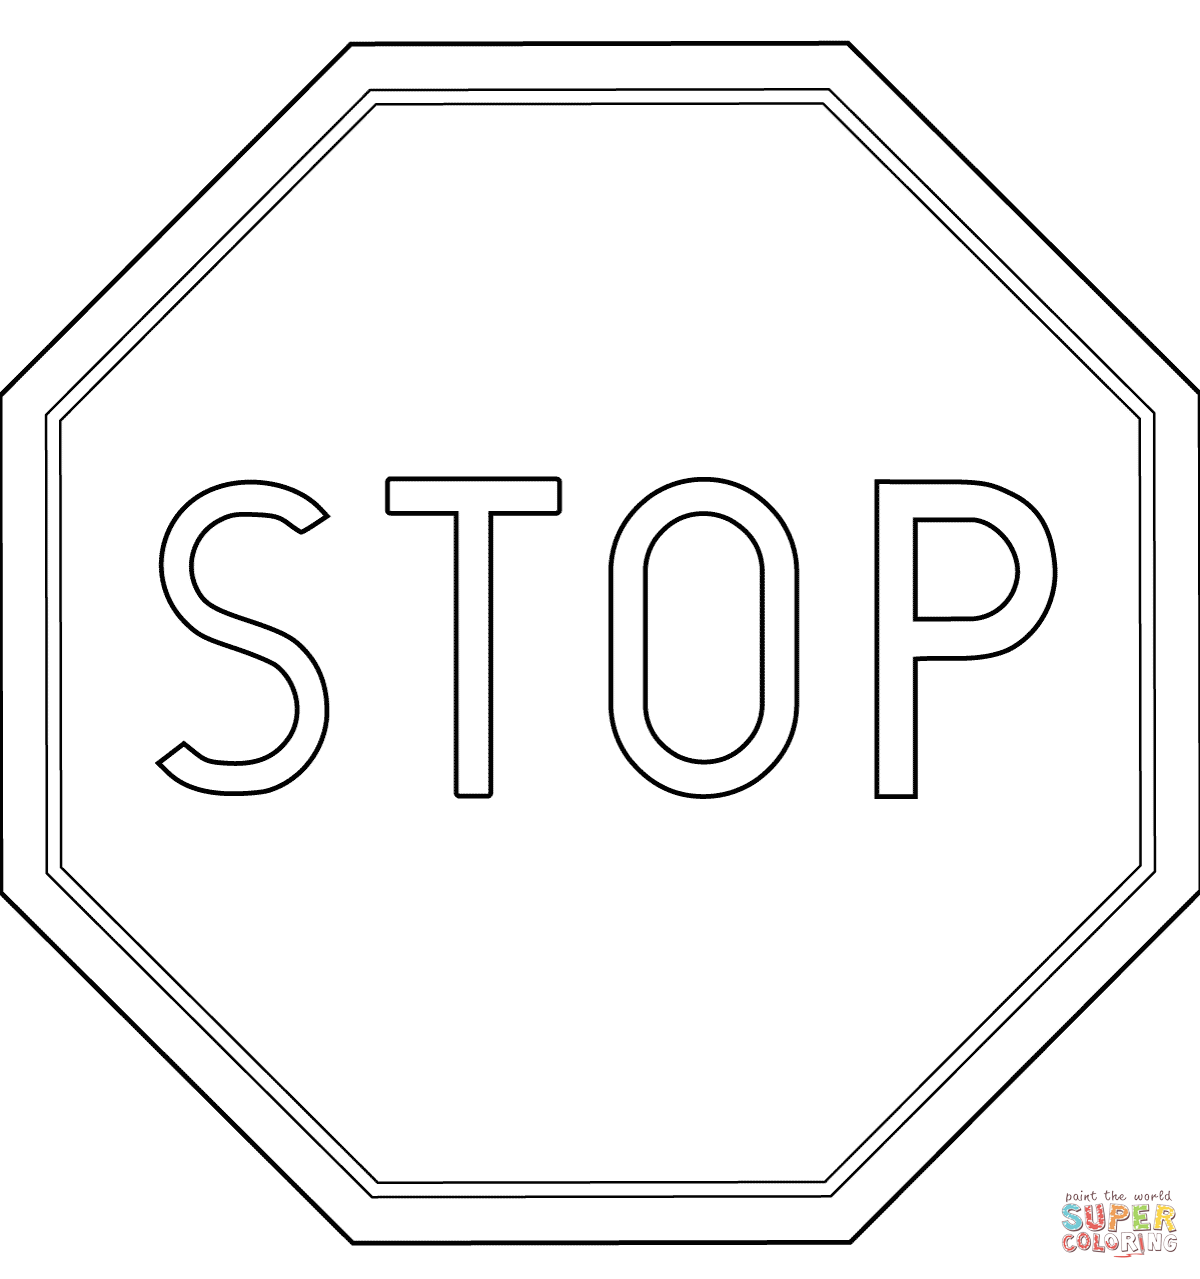 Poland Stop Road Sign B-20 coloring page | Free Printable Coloring ...